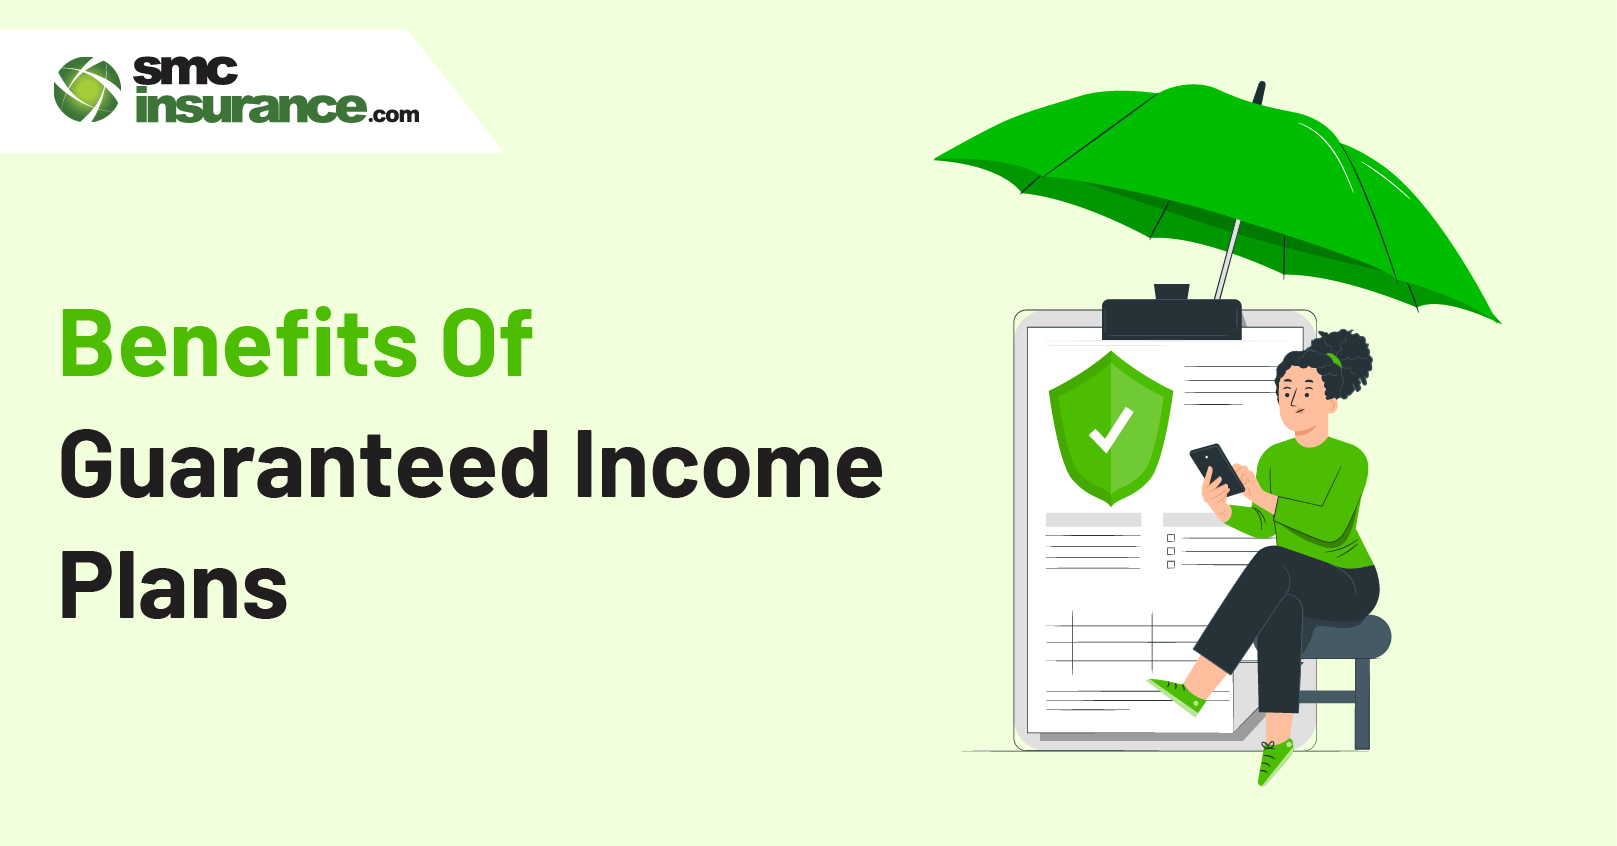 Benefits of Guaranteed Income Plans